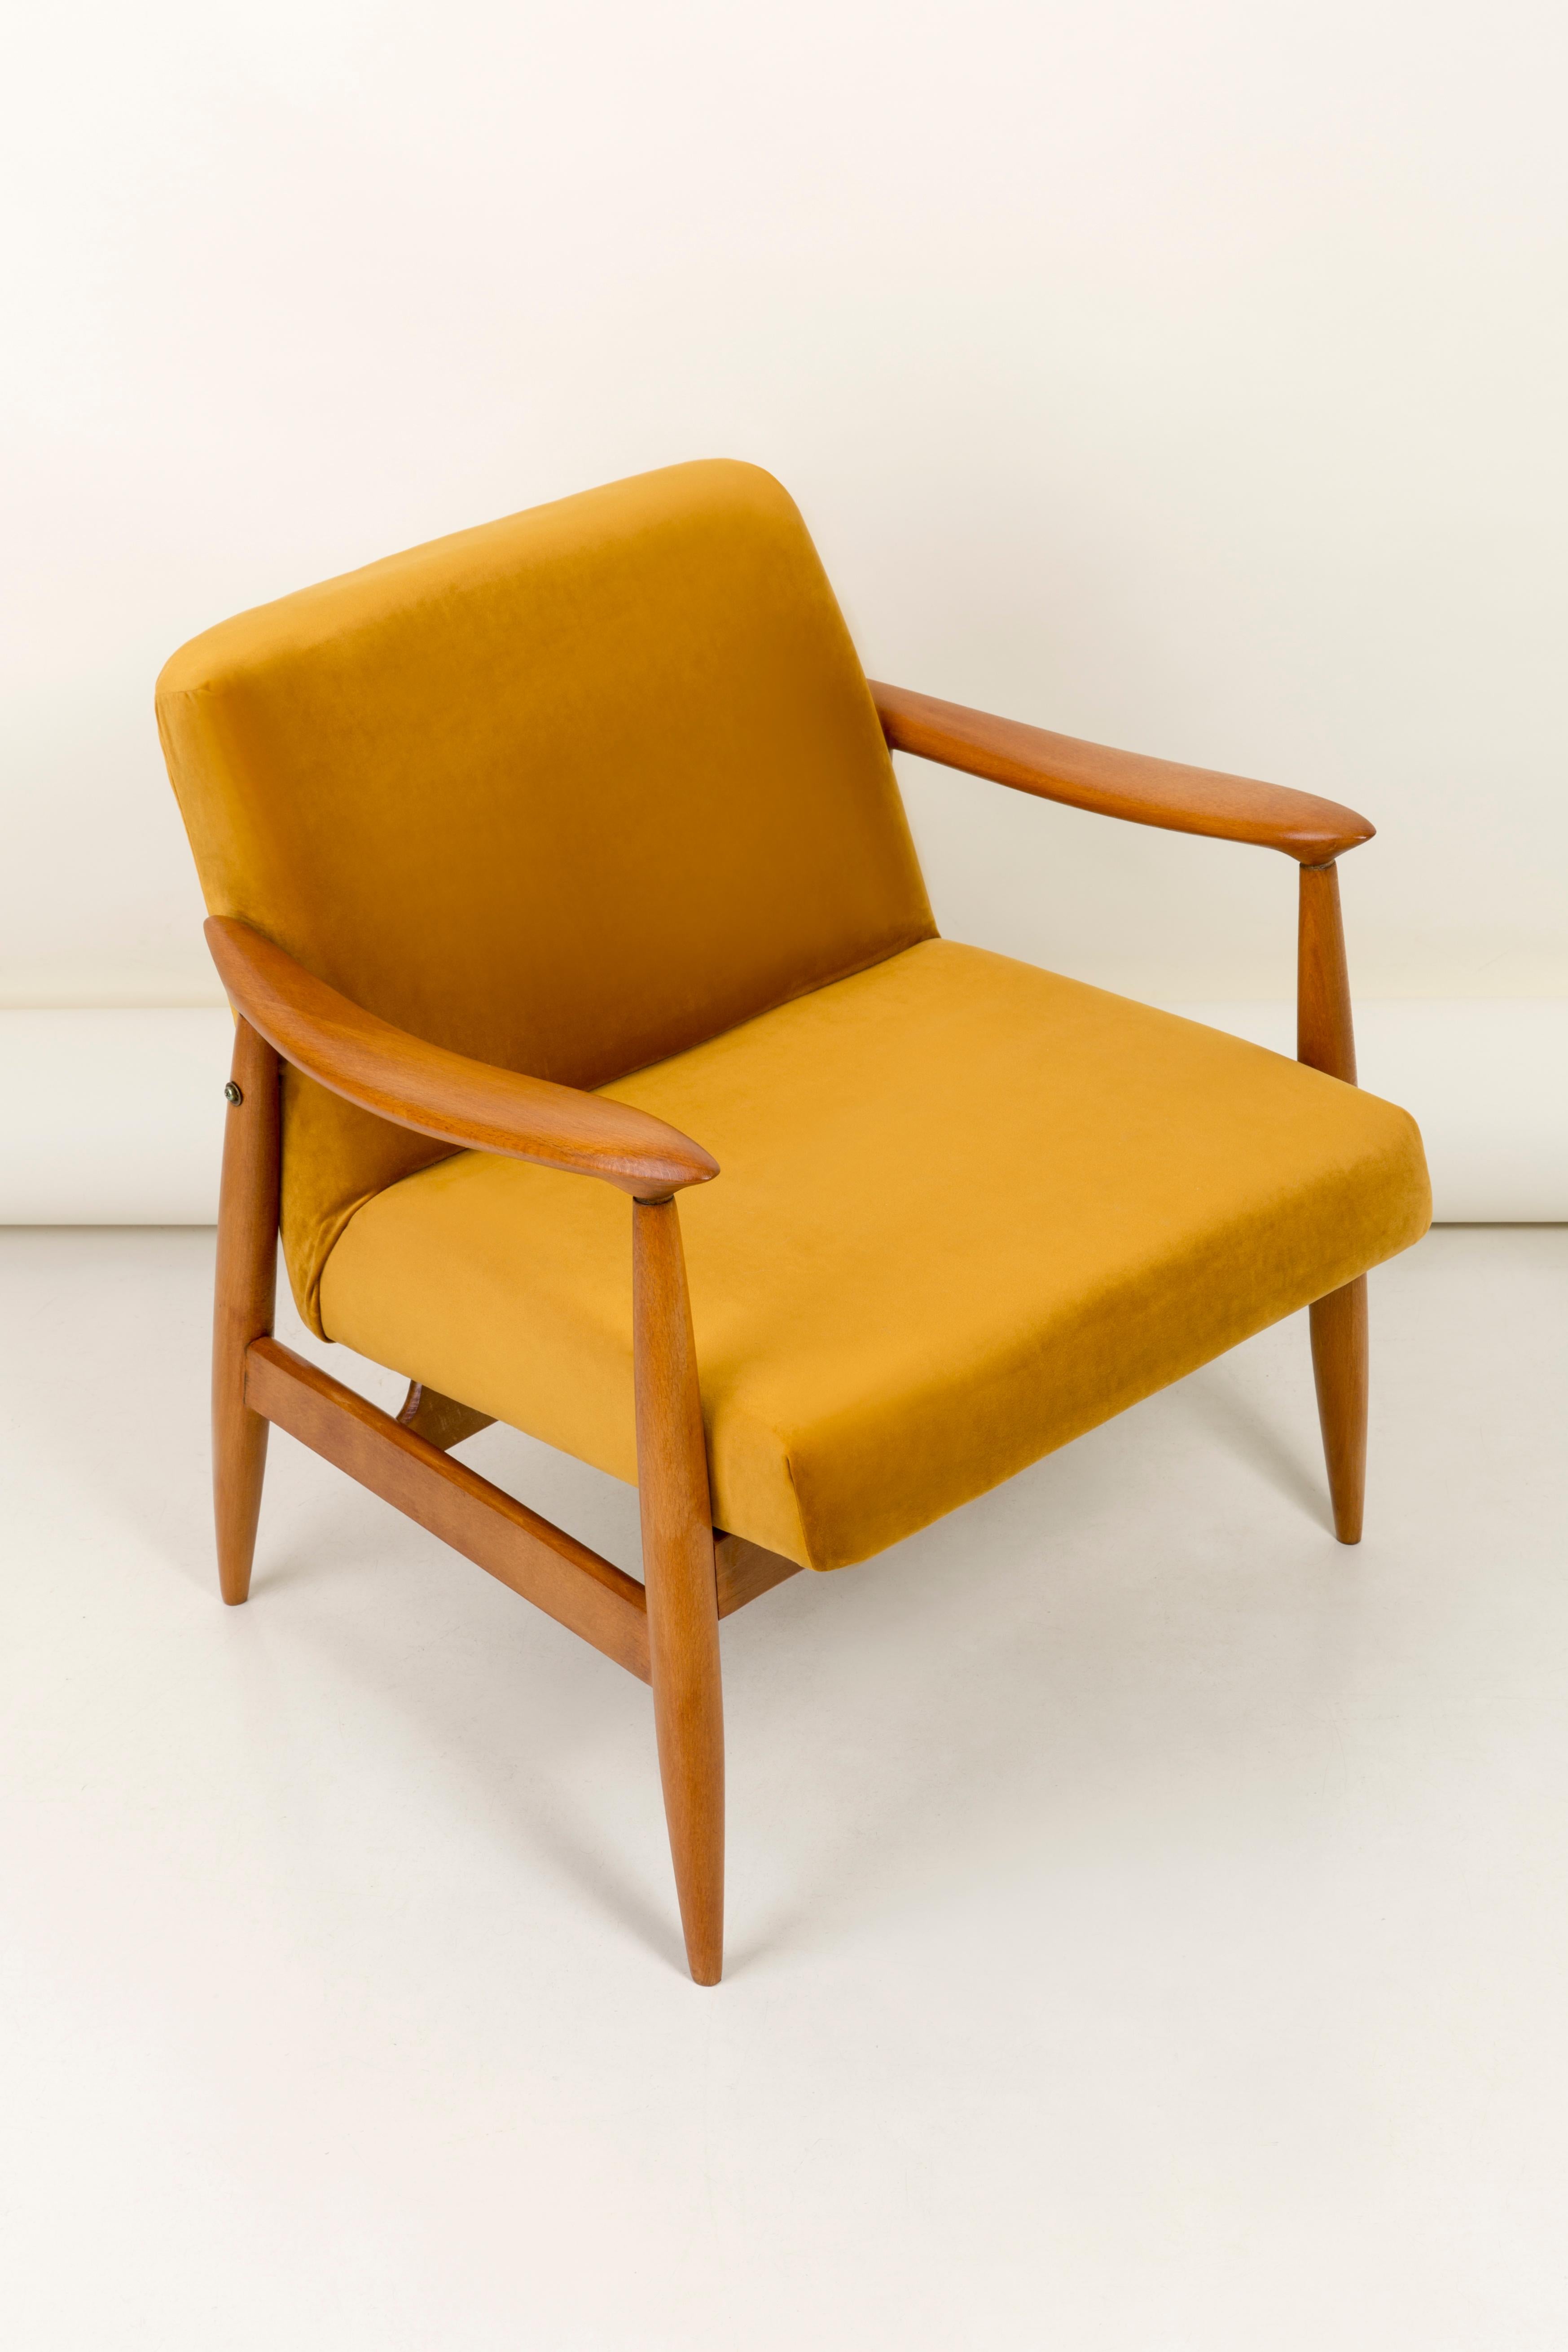 The GFM armchair is an icon of the polish design of the PRL period.

The famous armchair was designed in 1962 by the Polish interior designer and furniture designer 
Edmund Homa. Produced in the Lower Silesian Furniture Factory in